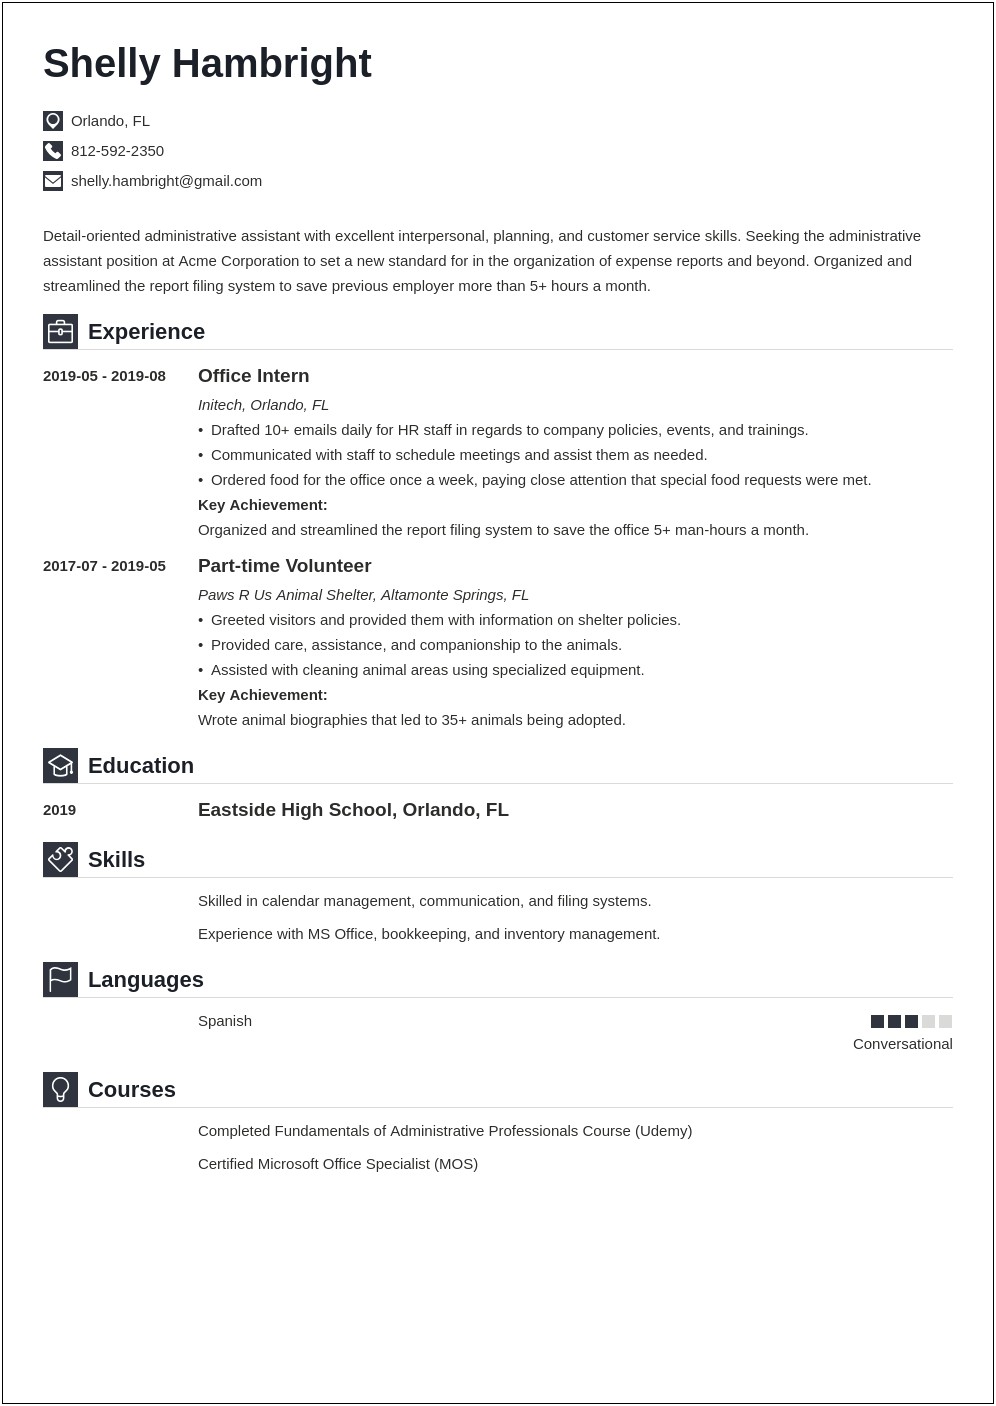 Additional Skills For Administrative Assistant Resume